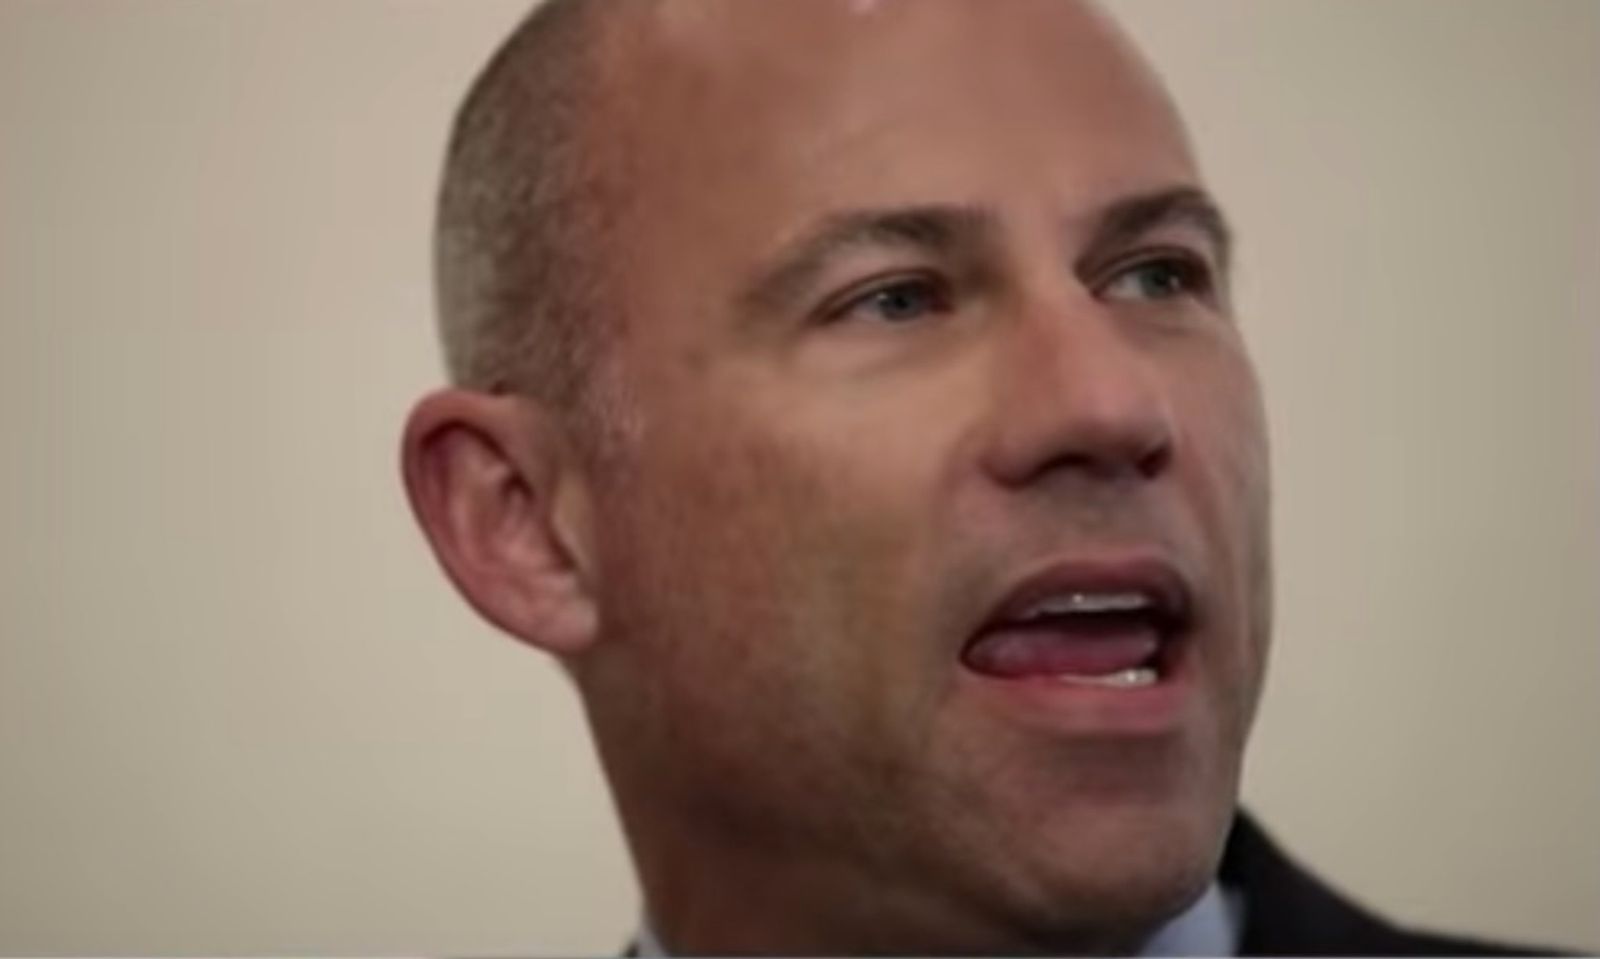 Avenatti Has Run Out of Money to Pay Legal Costs, Lawyer Says